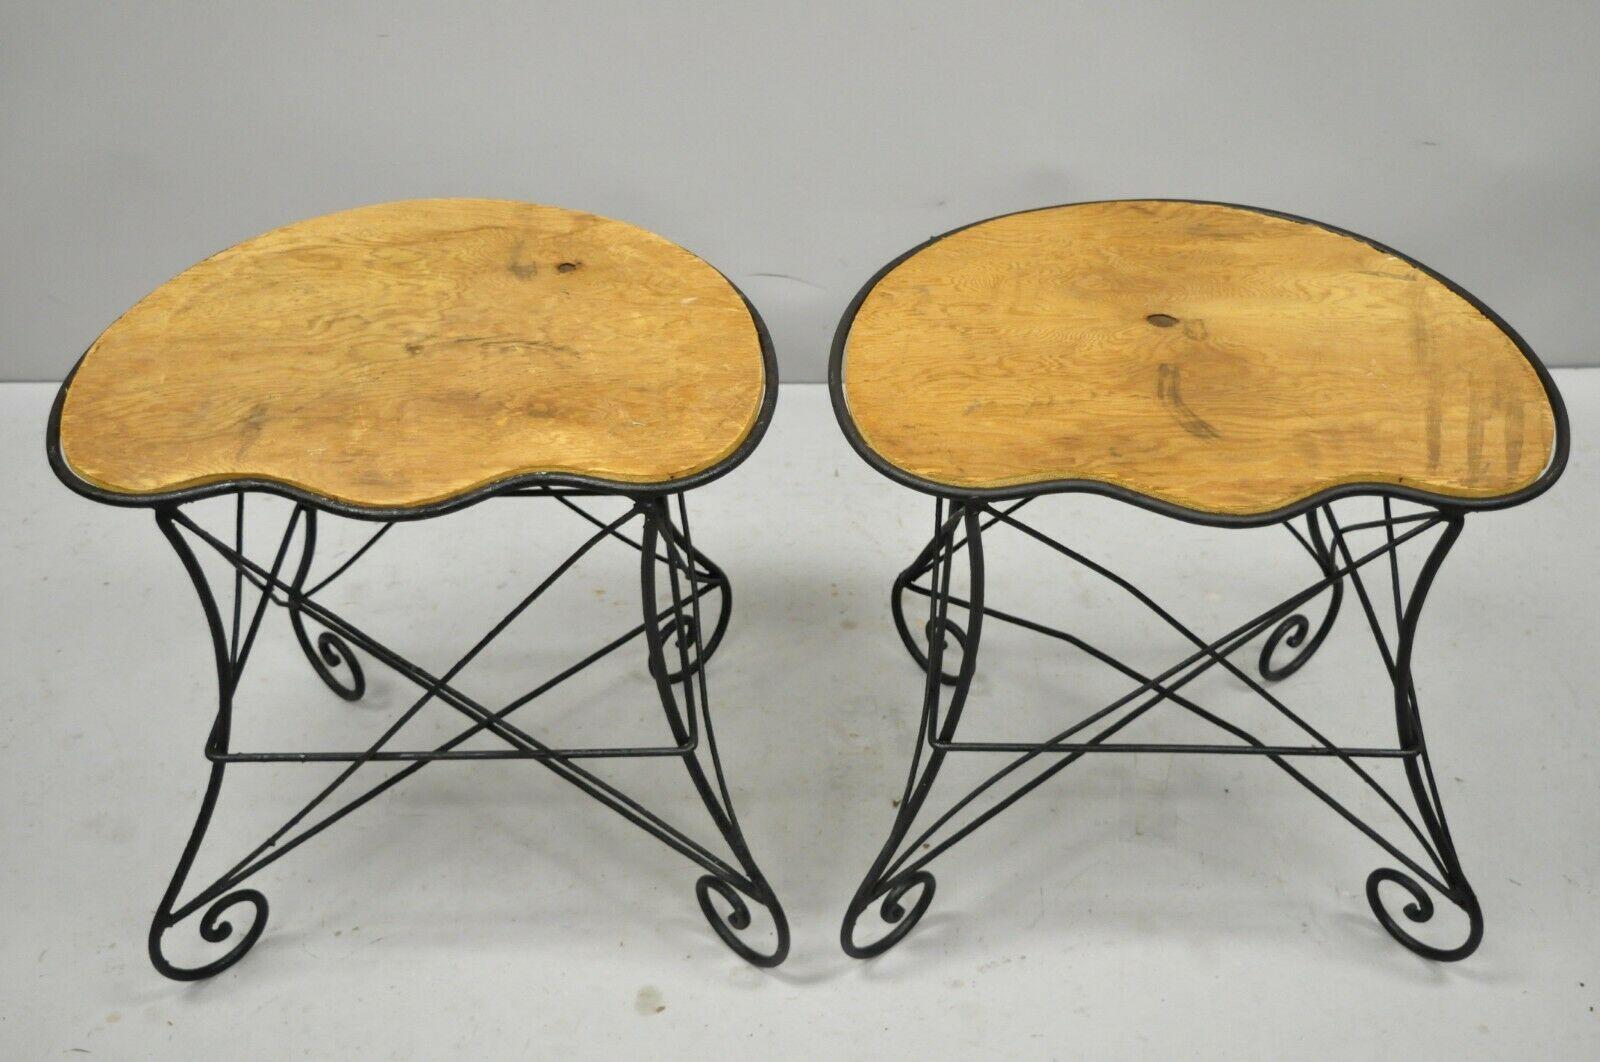 Pair of French Art Nouveau style stool bench seats with scrolling wrought iron frame, early 20th century. Measurements: 19